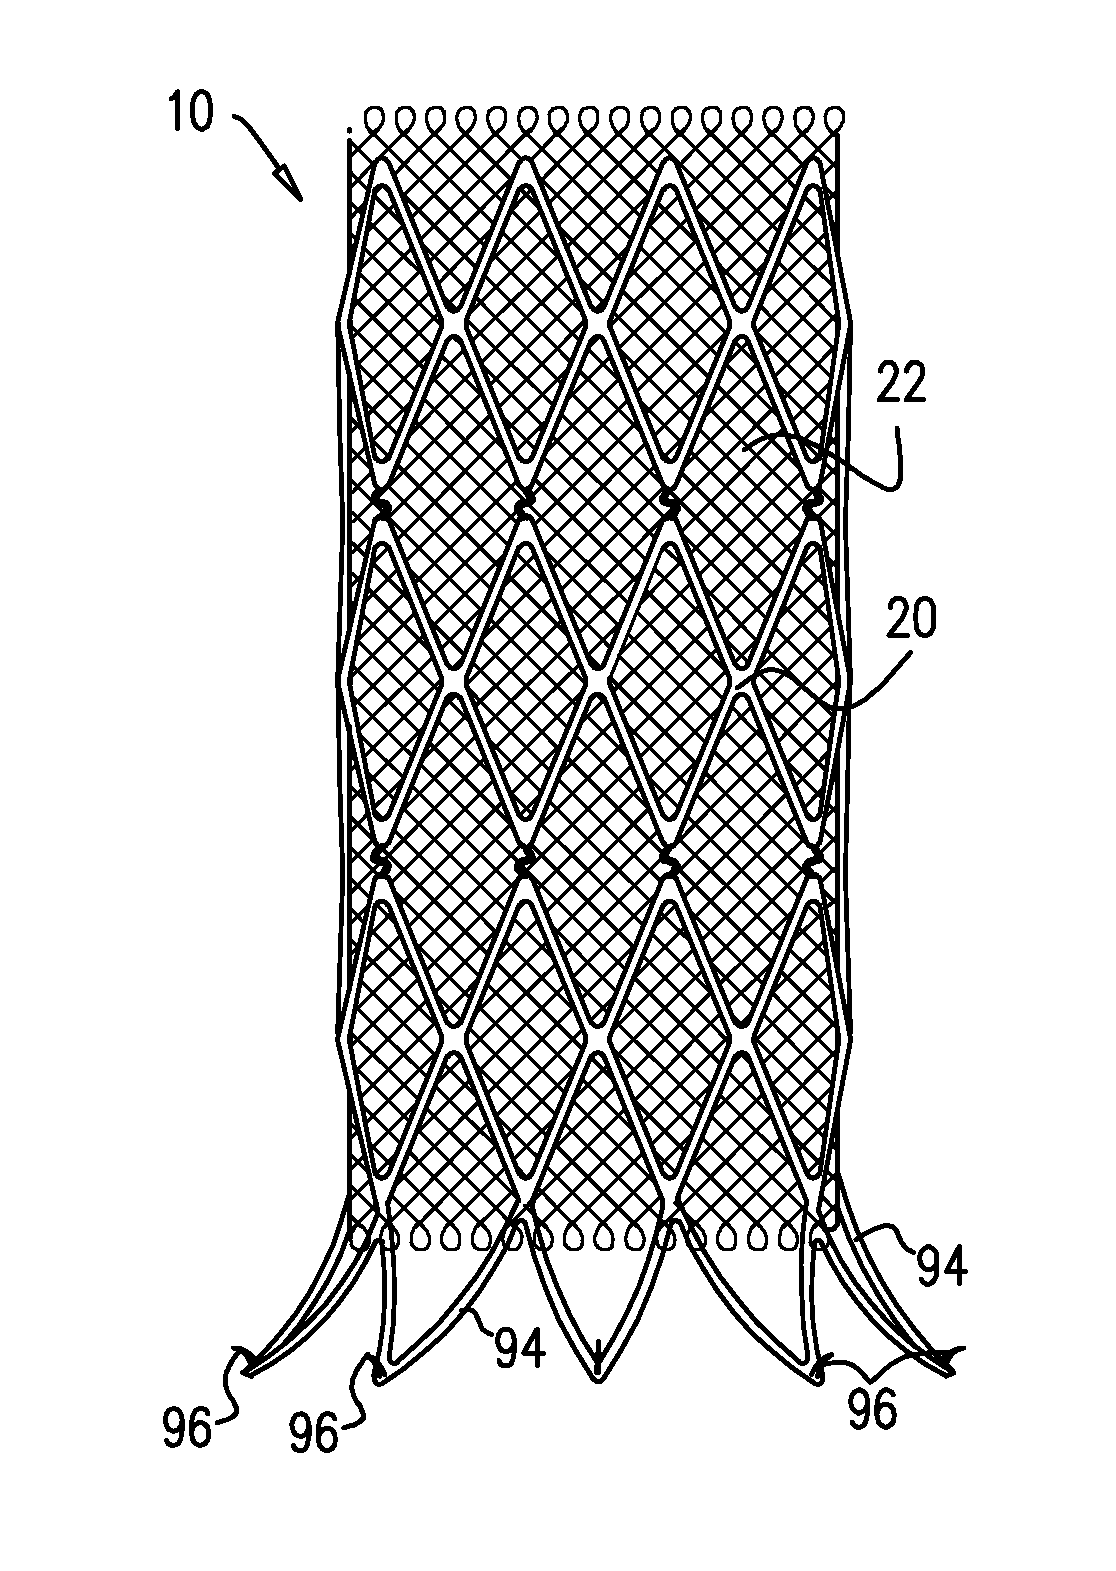 Double-layer stent